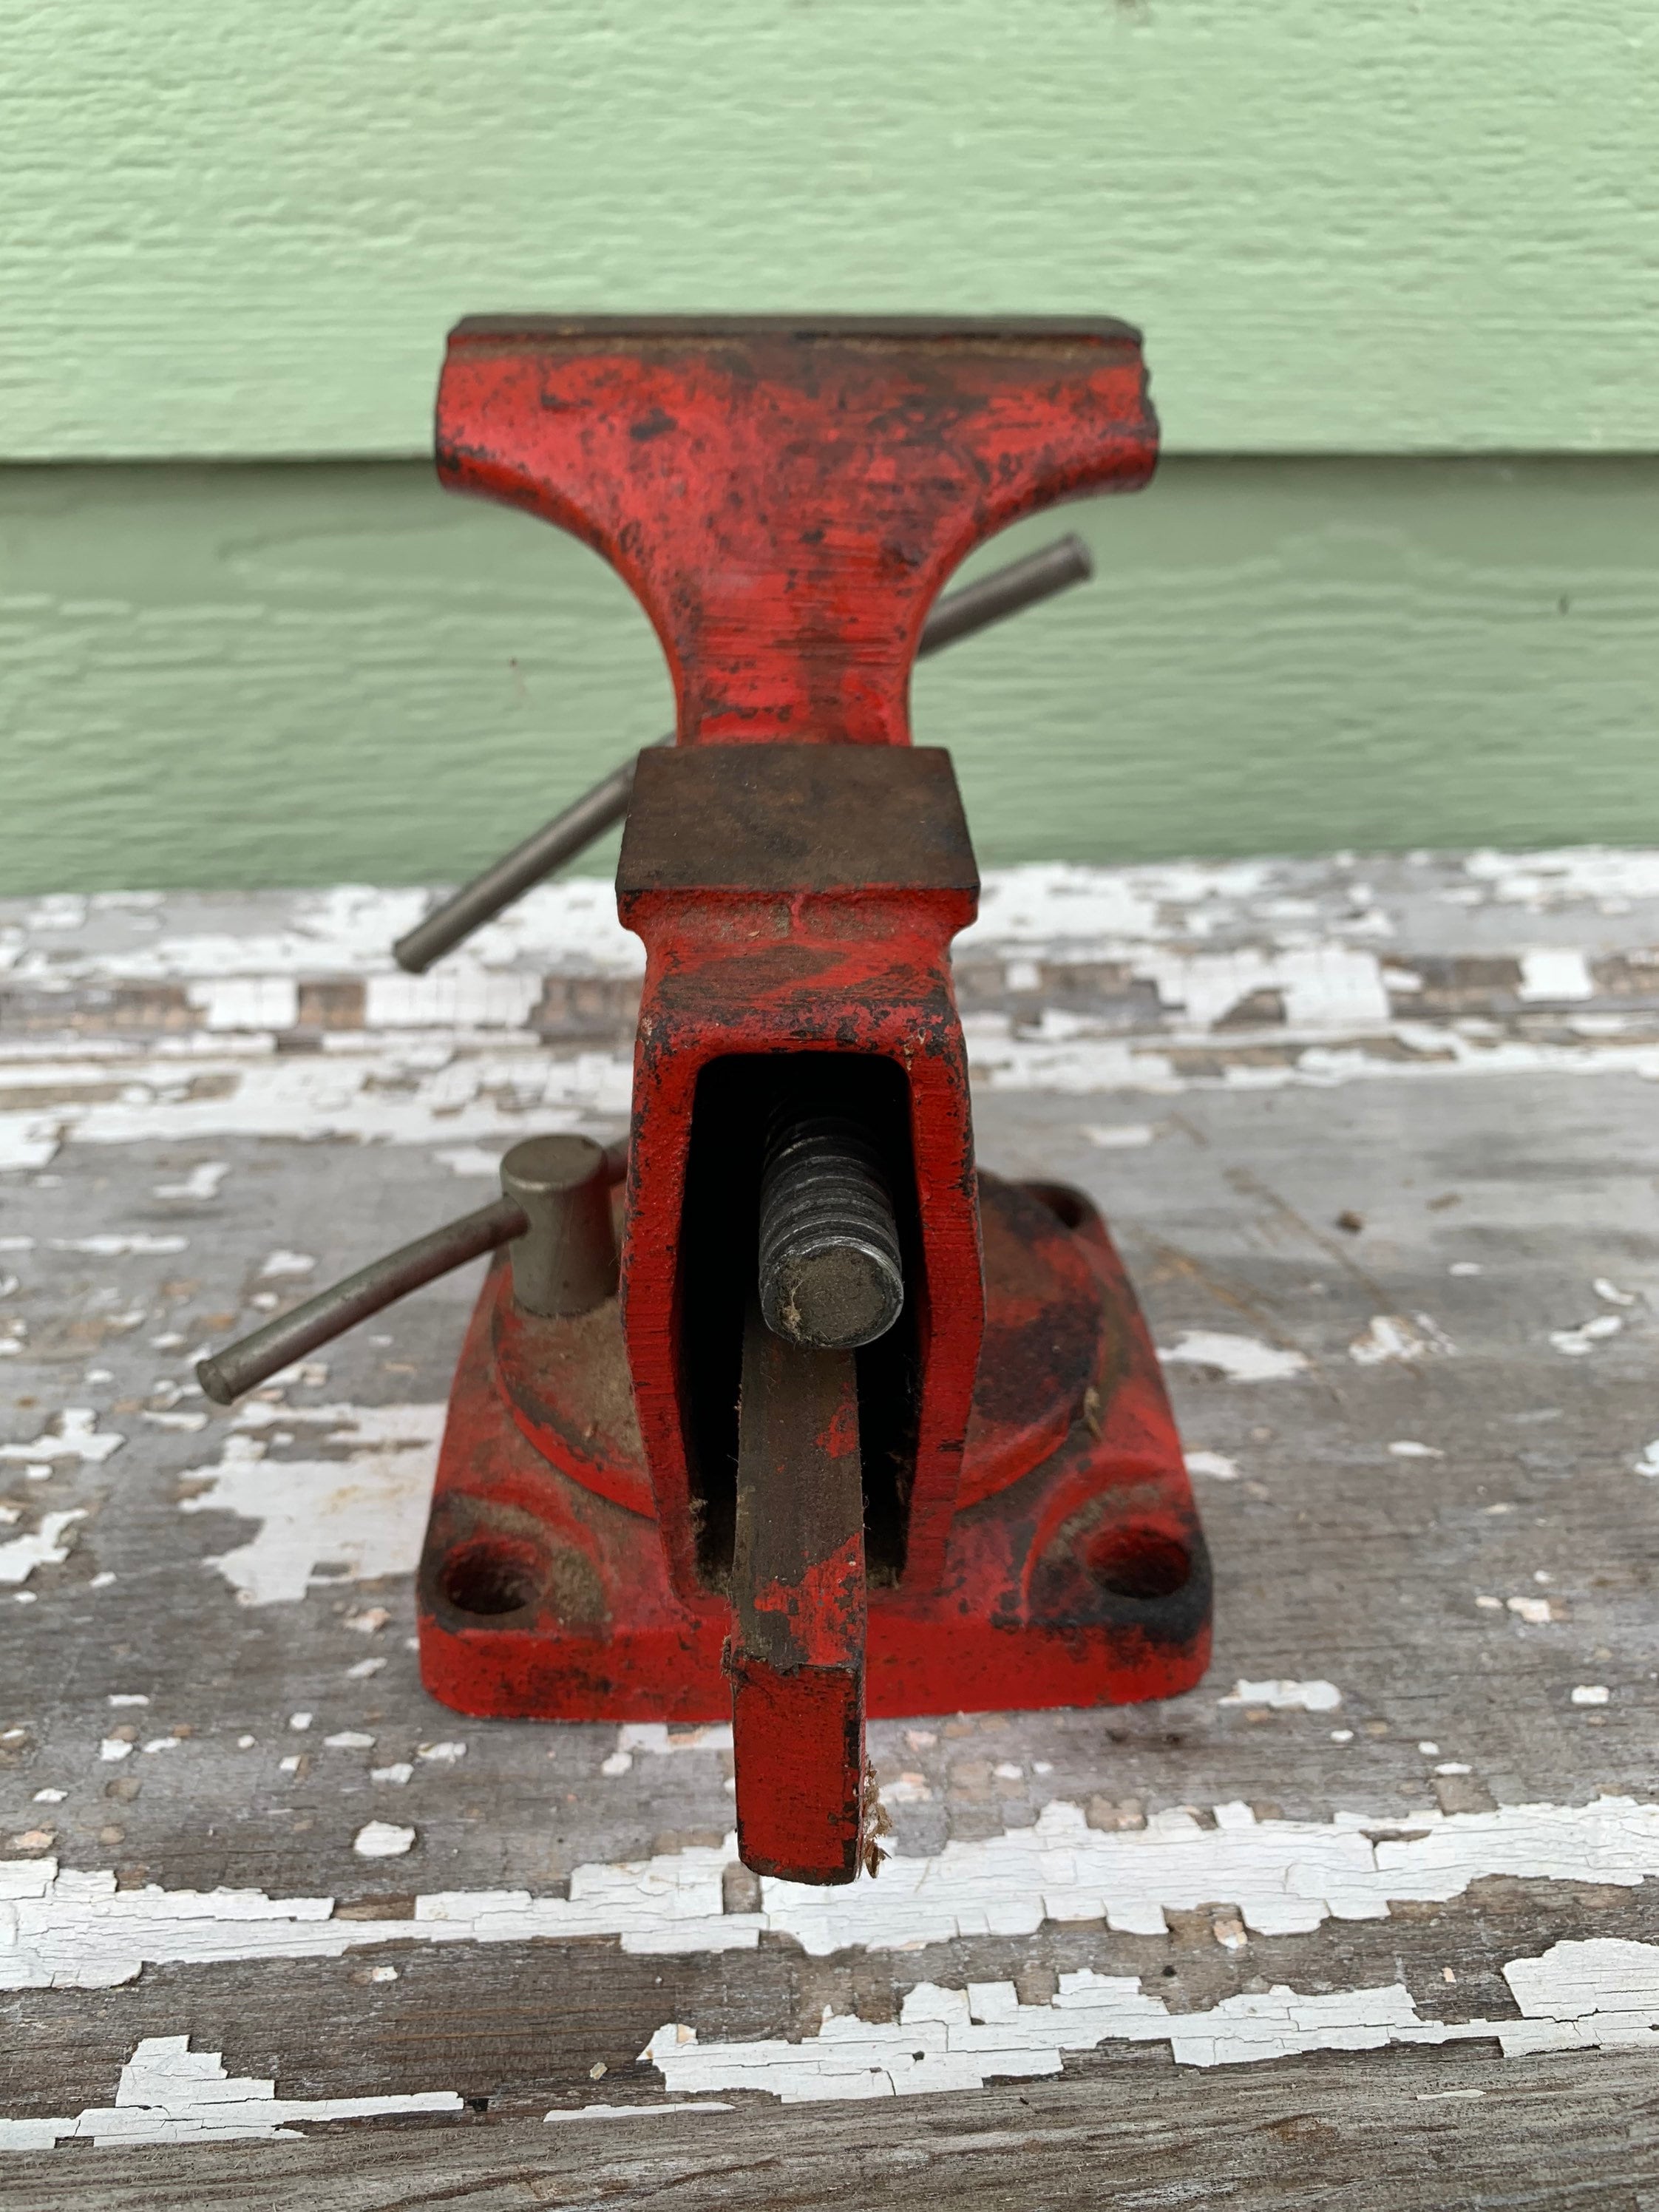 Wilton Bench Vise Grip Jaws Red Work Tool Small Vintage Heavy